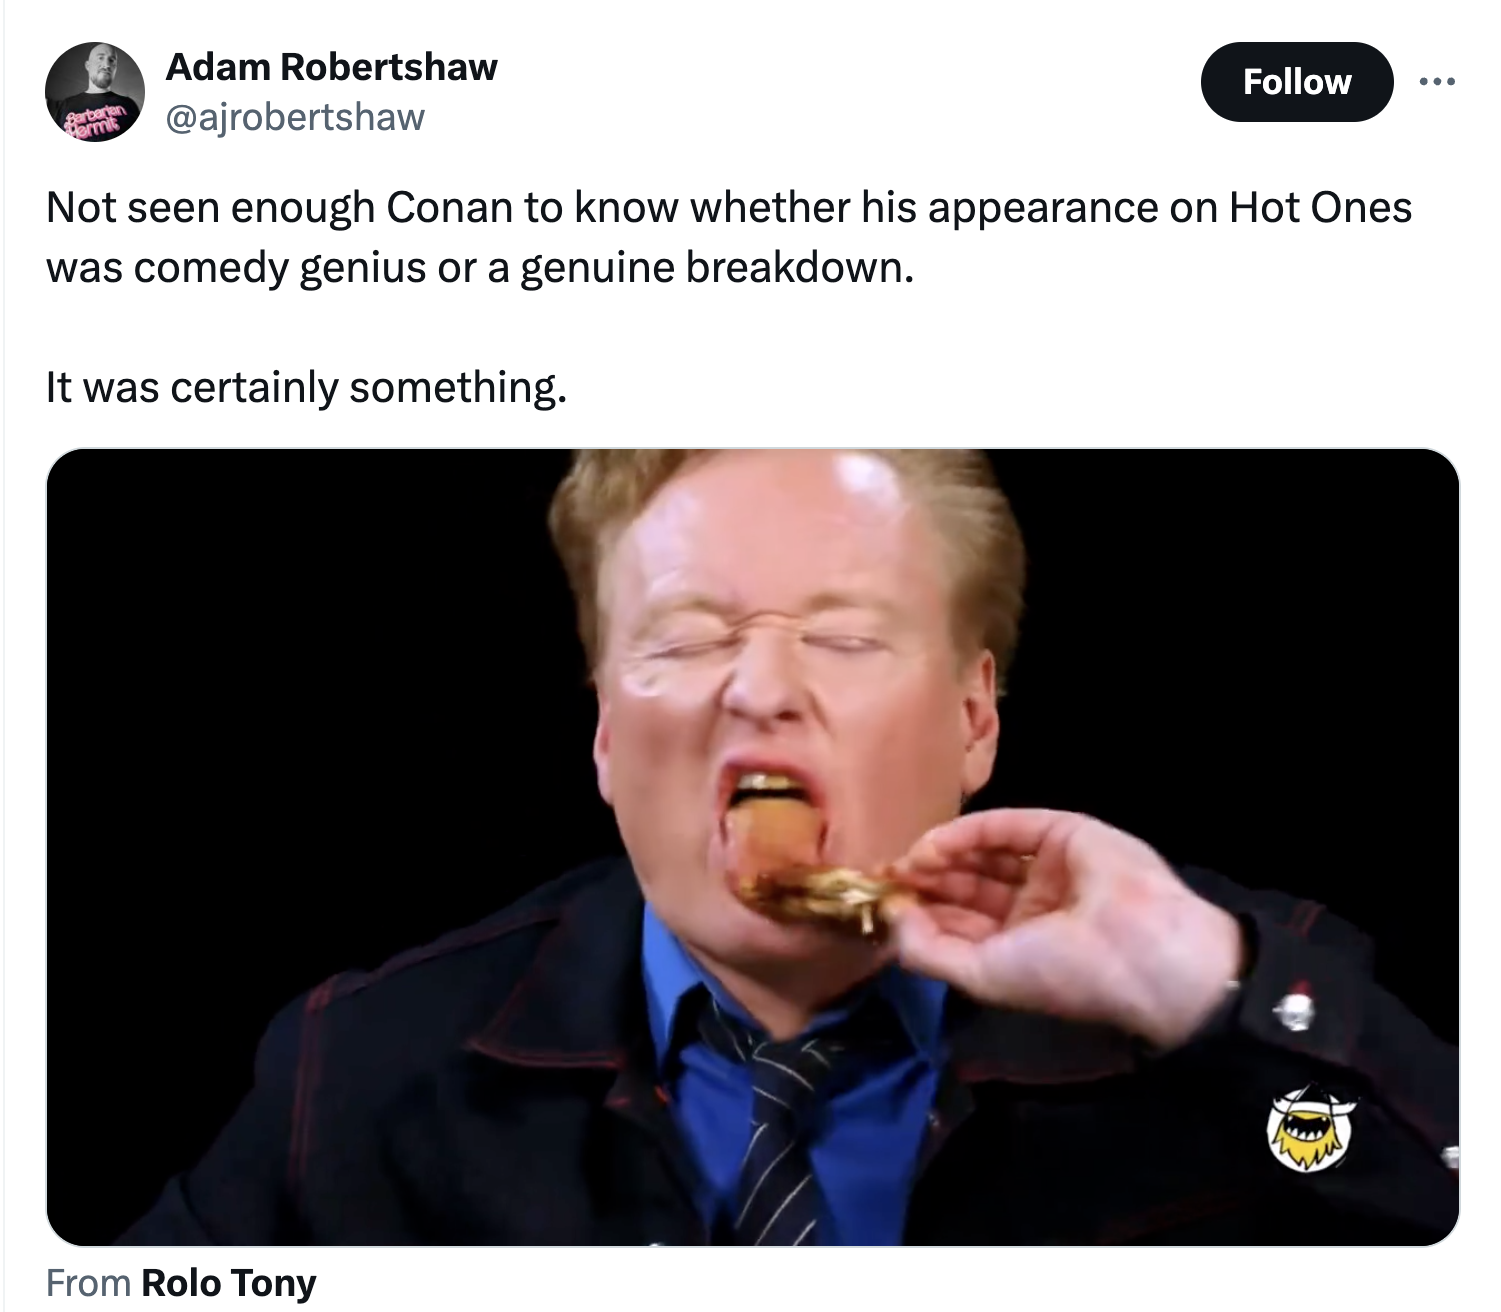 eating - Adam Robertshaw Not seen enough Conan to know whether his appearance on Hot Ones was comedy genius or a genuine breakdown. It was certainly something. From Rolo Tony